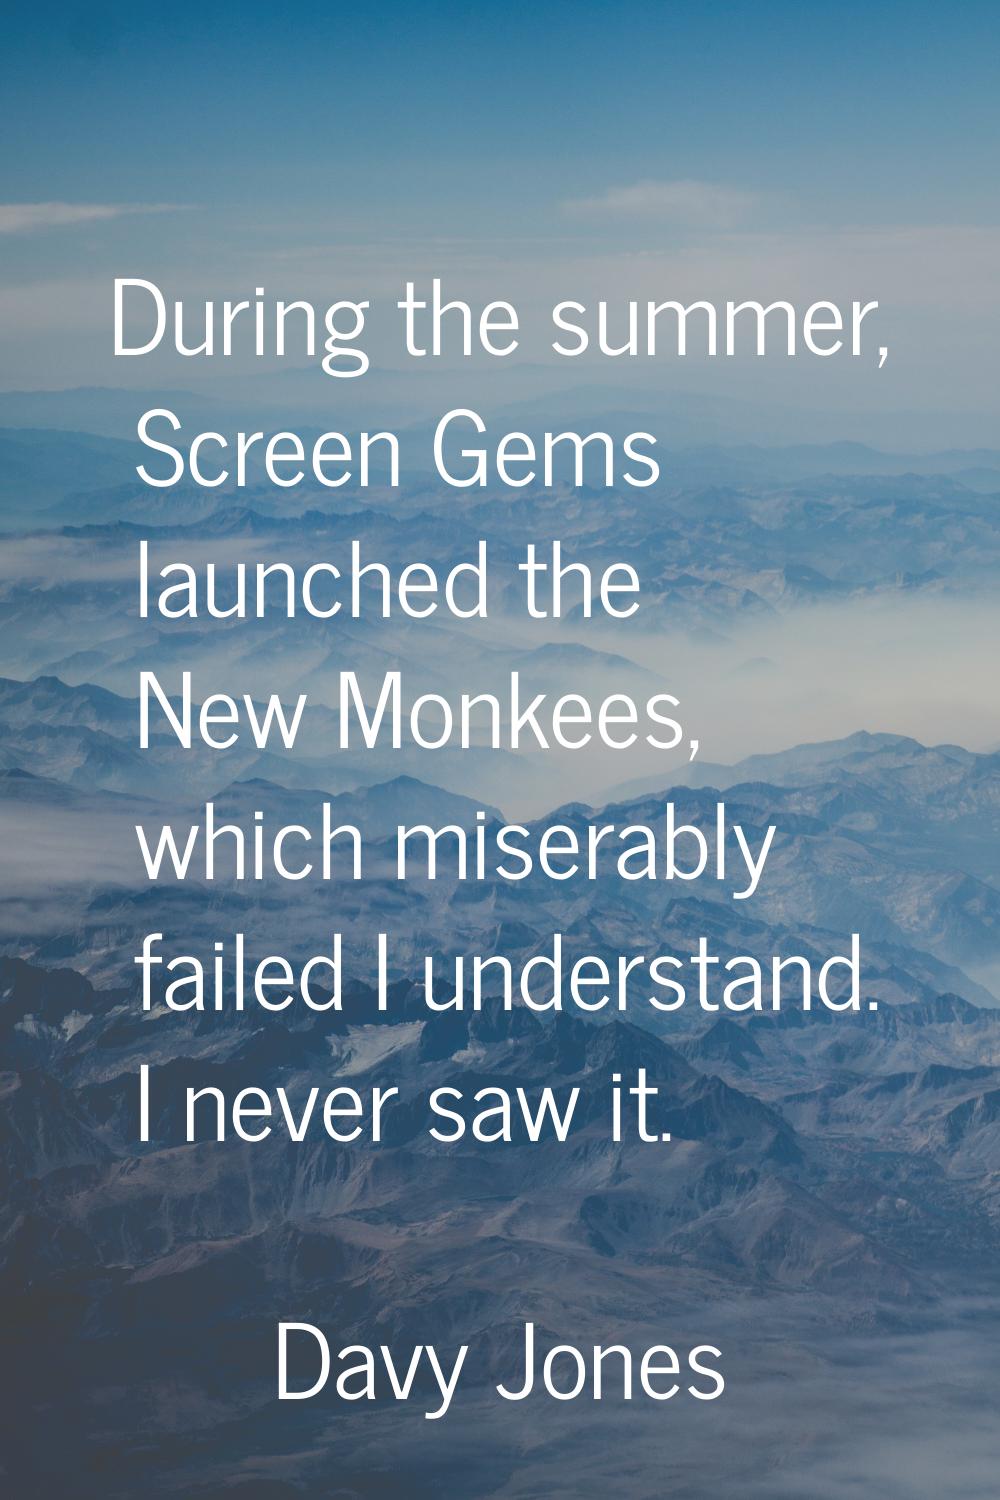 During the summer, Screen Gems launched the New Monkees, which miserably failed I understand. I nev